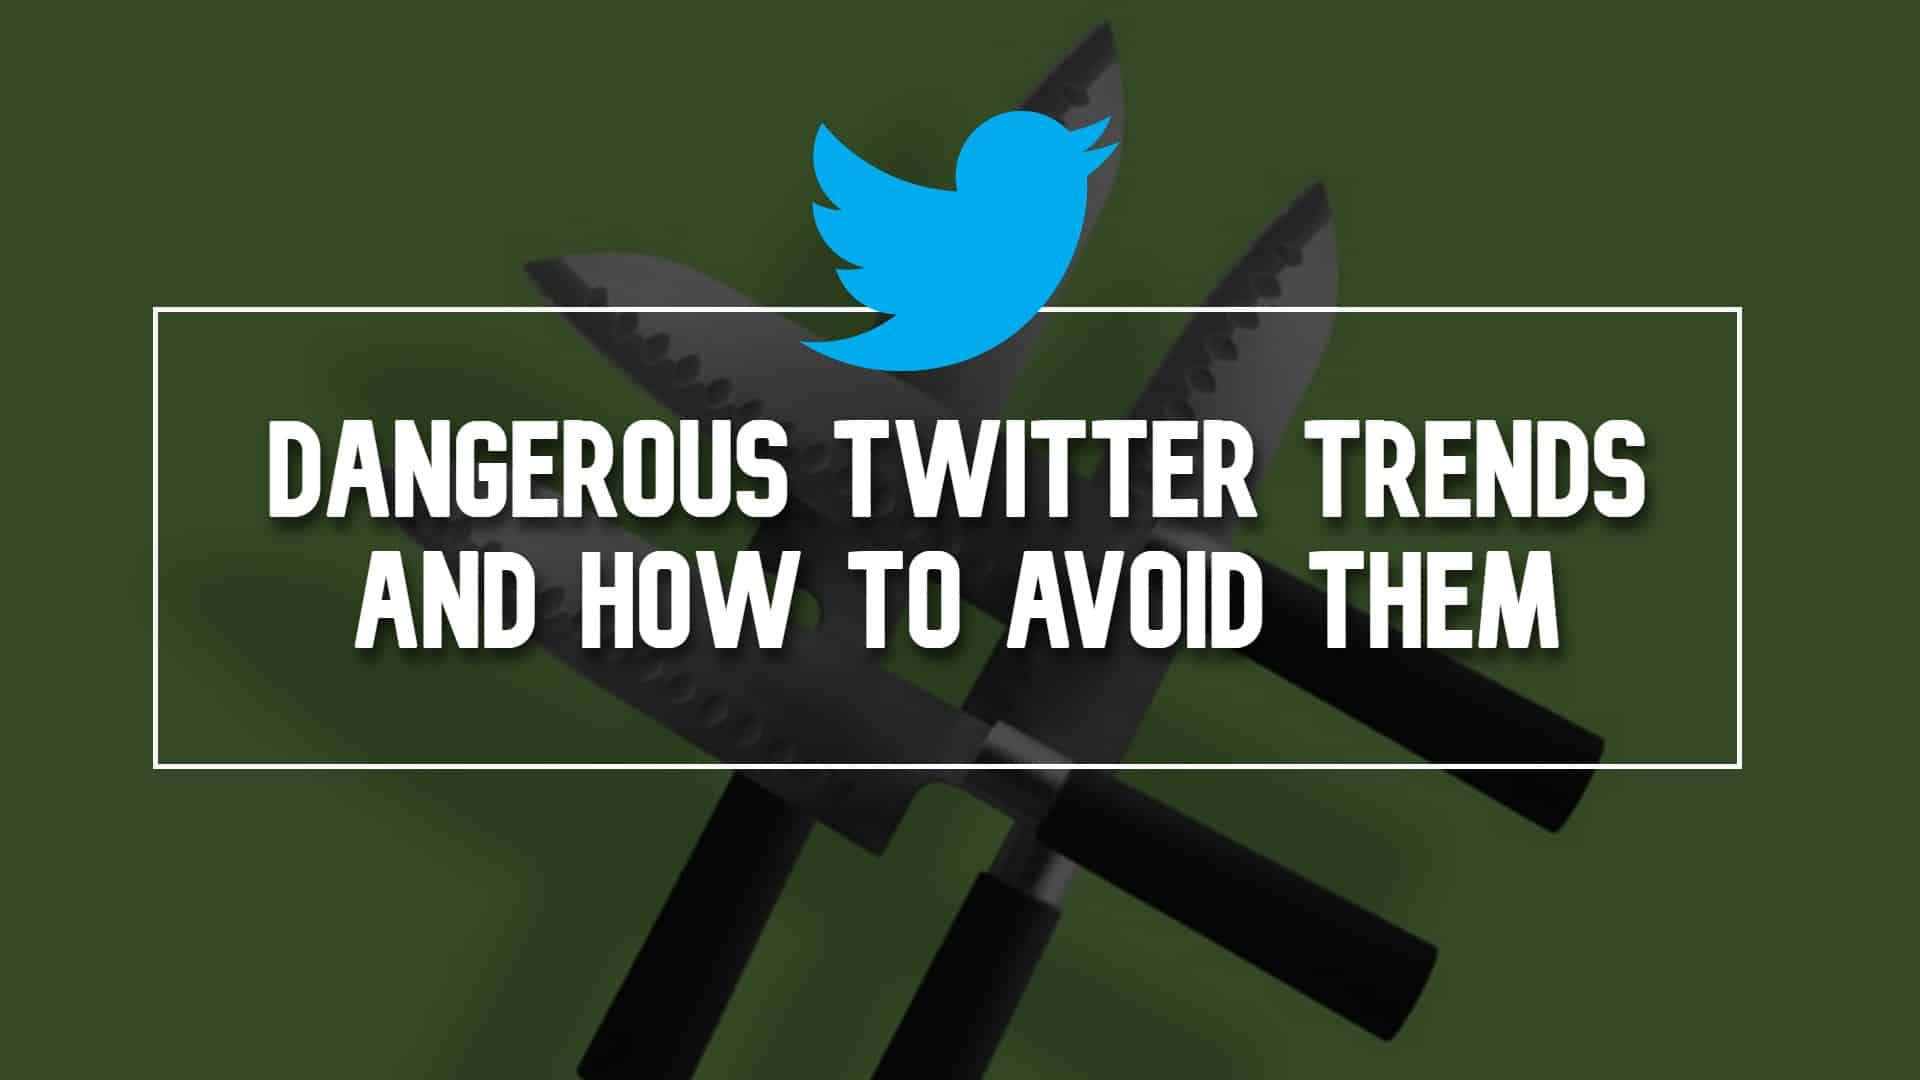 Dangerous Twitter Trends and How to Avoid Them